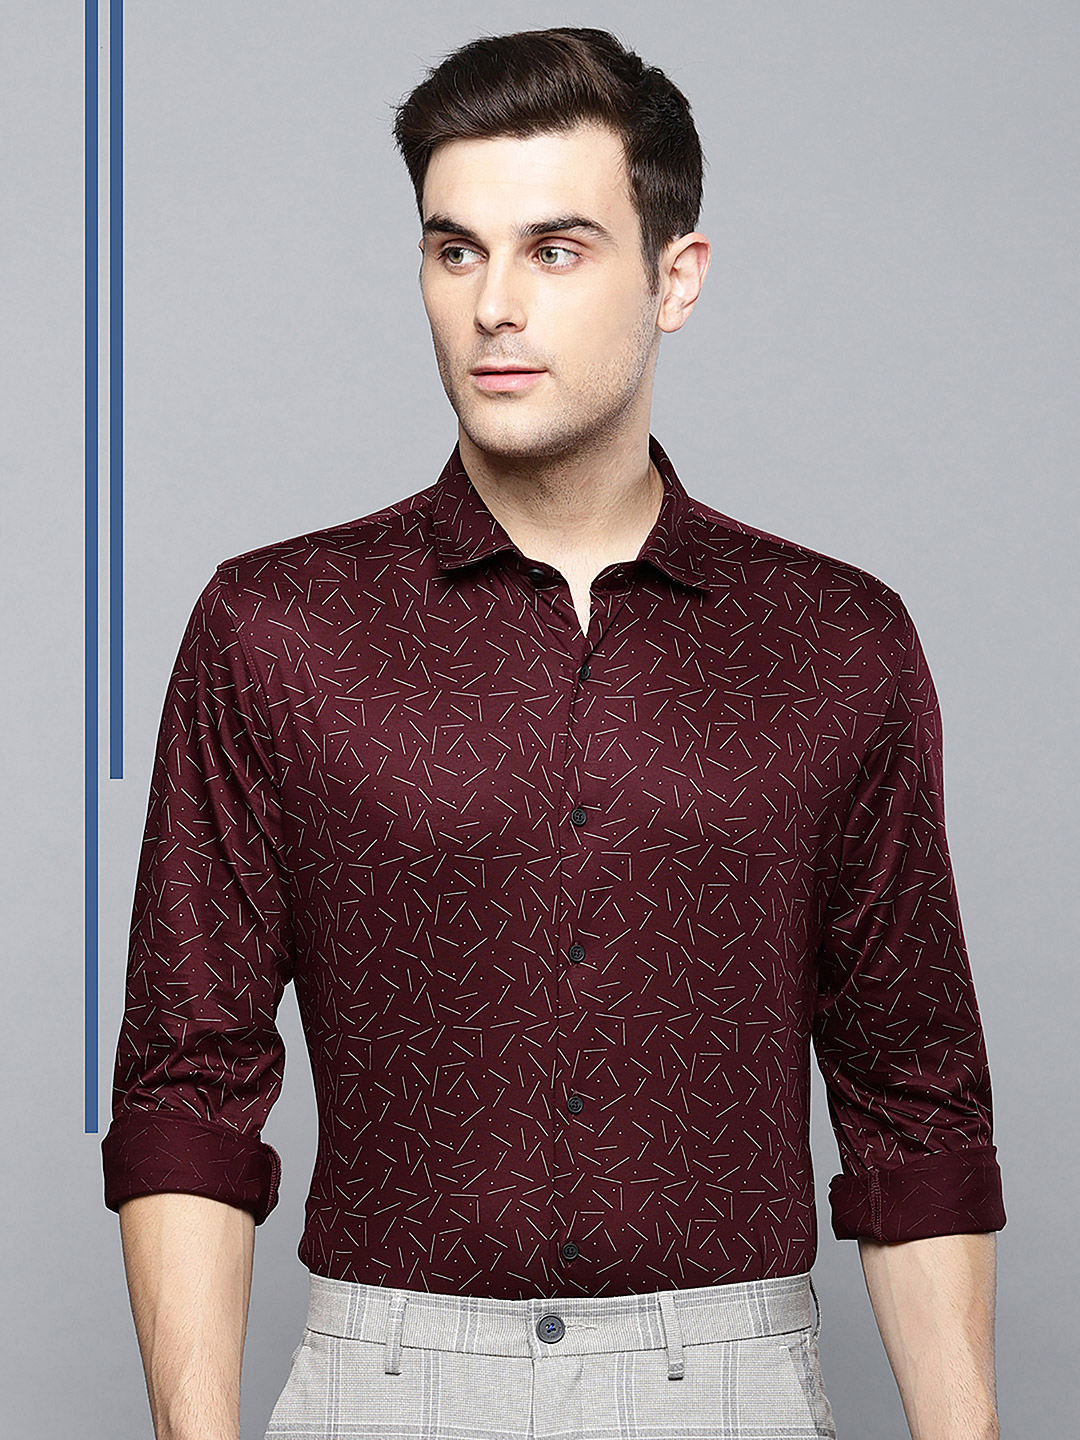 louis philippe party wear shirts